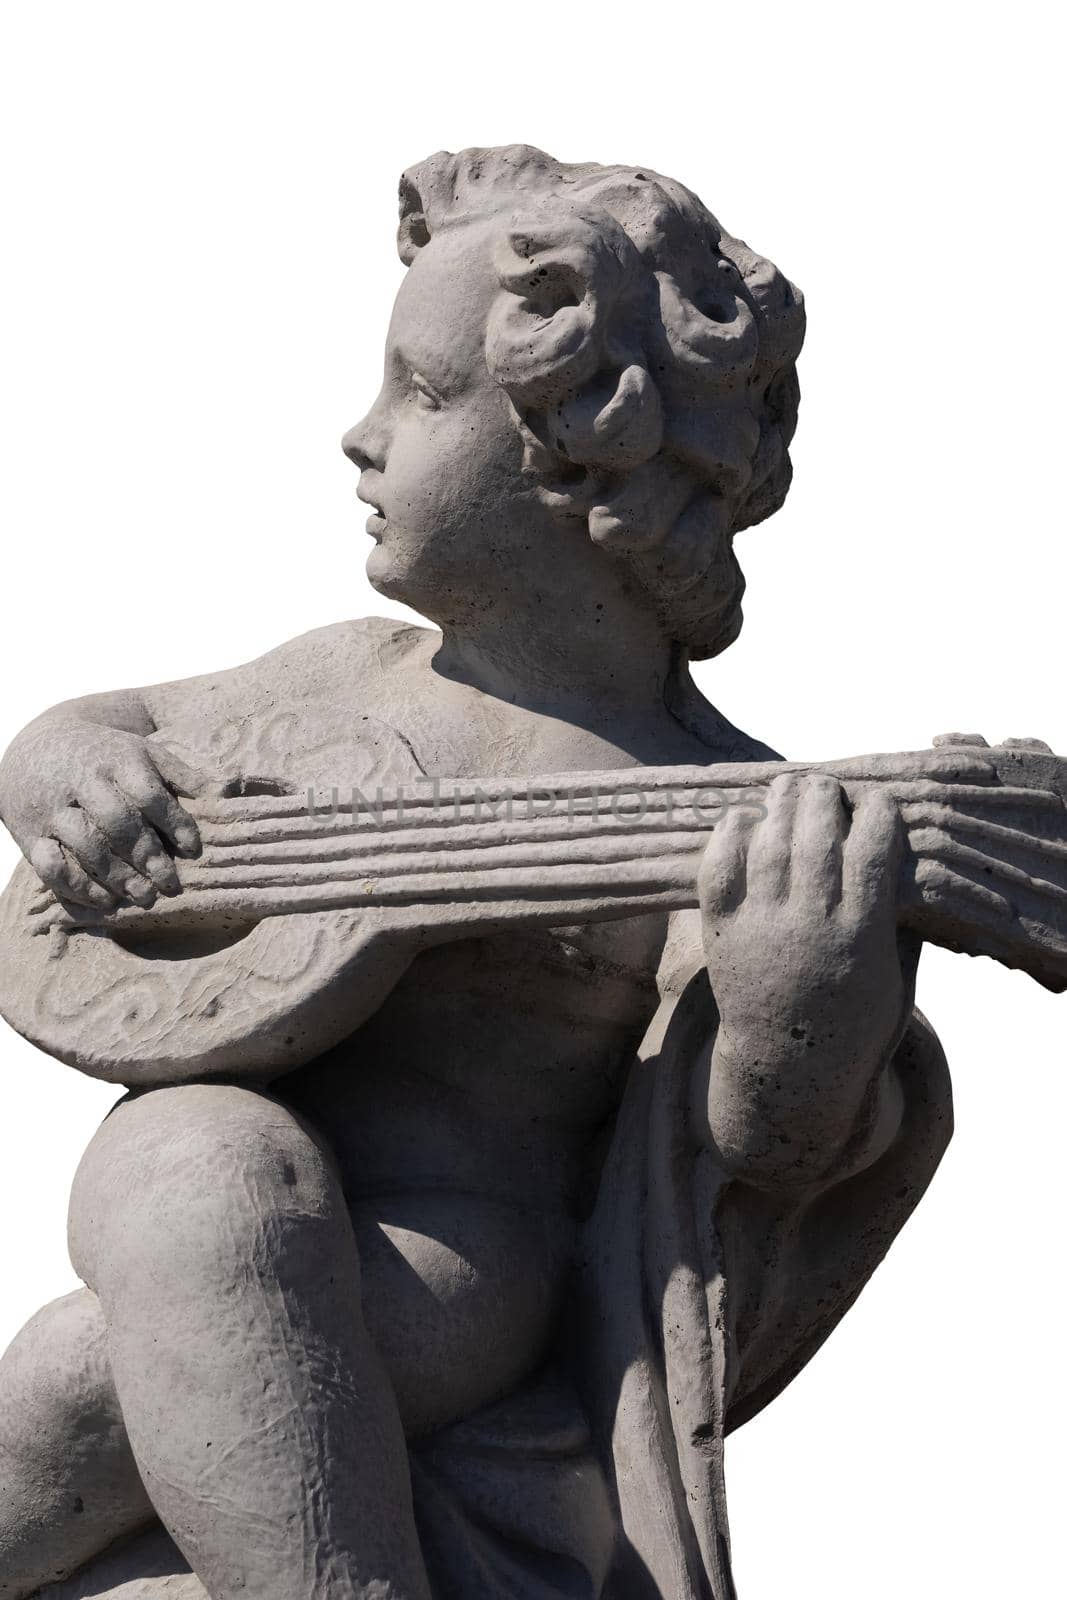 Side view of ancient stone sculpture of naked cherub playing lute on white background. art and classical style romantic figurative stone sculpture.